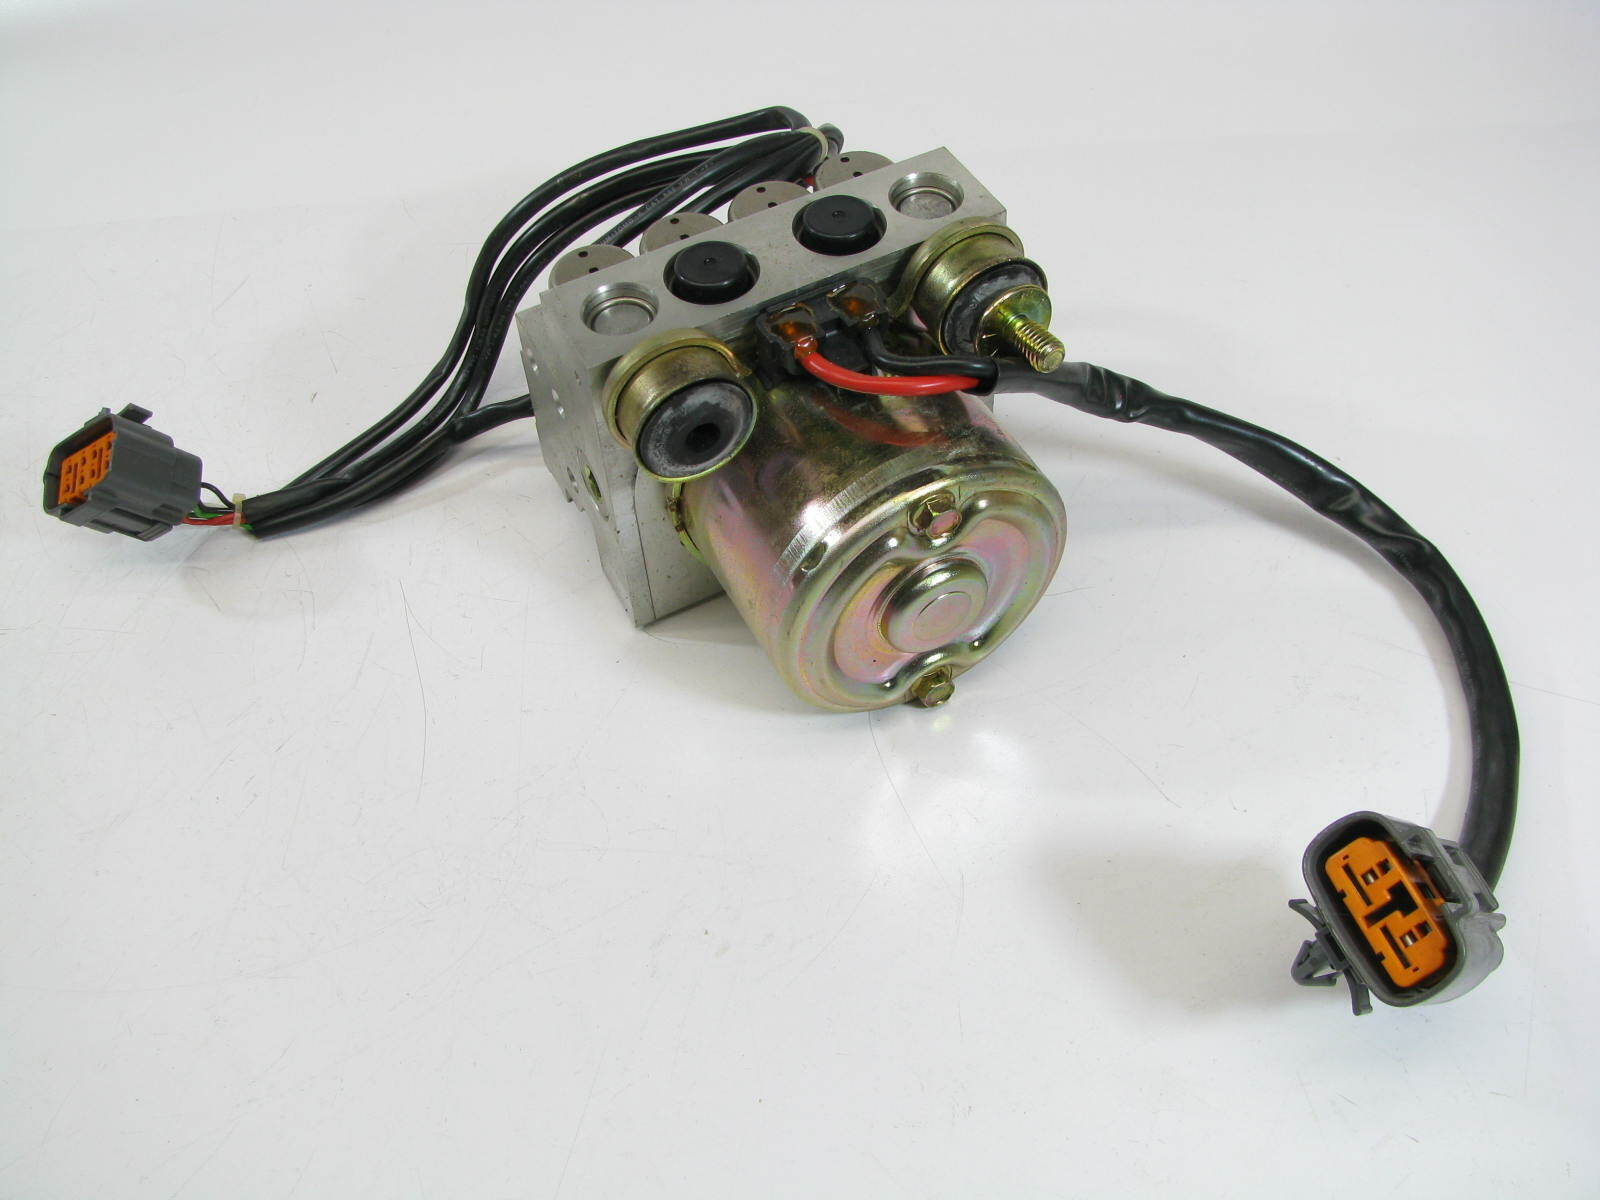 NEW - OUT OF BOX GD4T-43-7A0 ABS Brake Pump 1997 Mazda MX-6